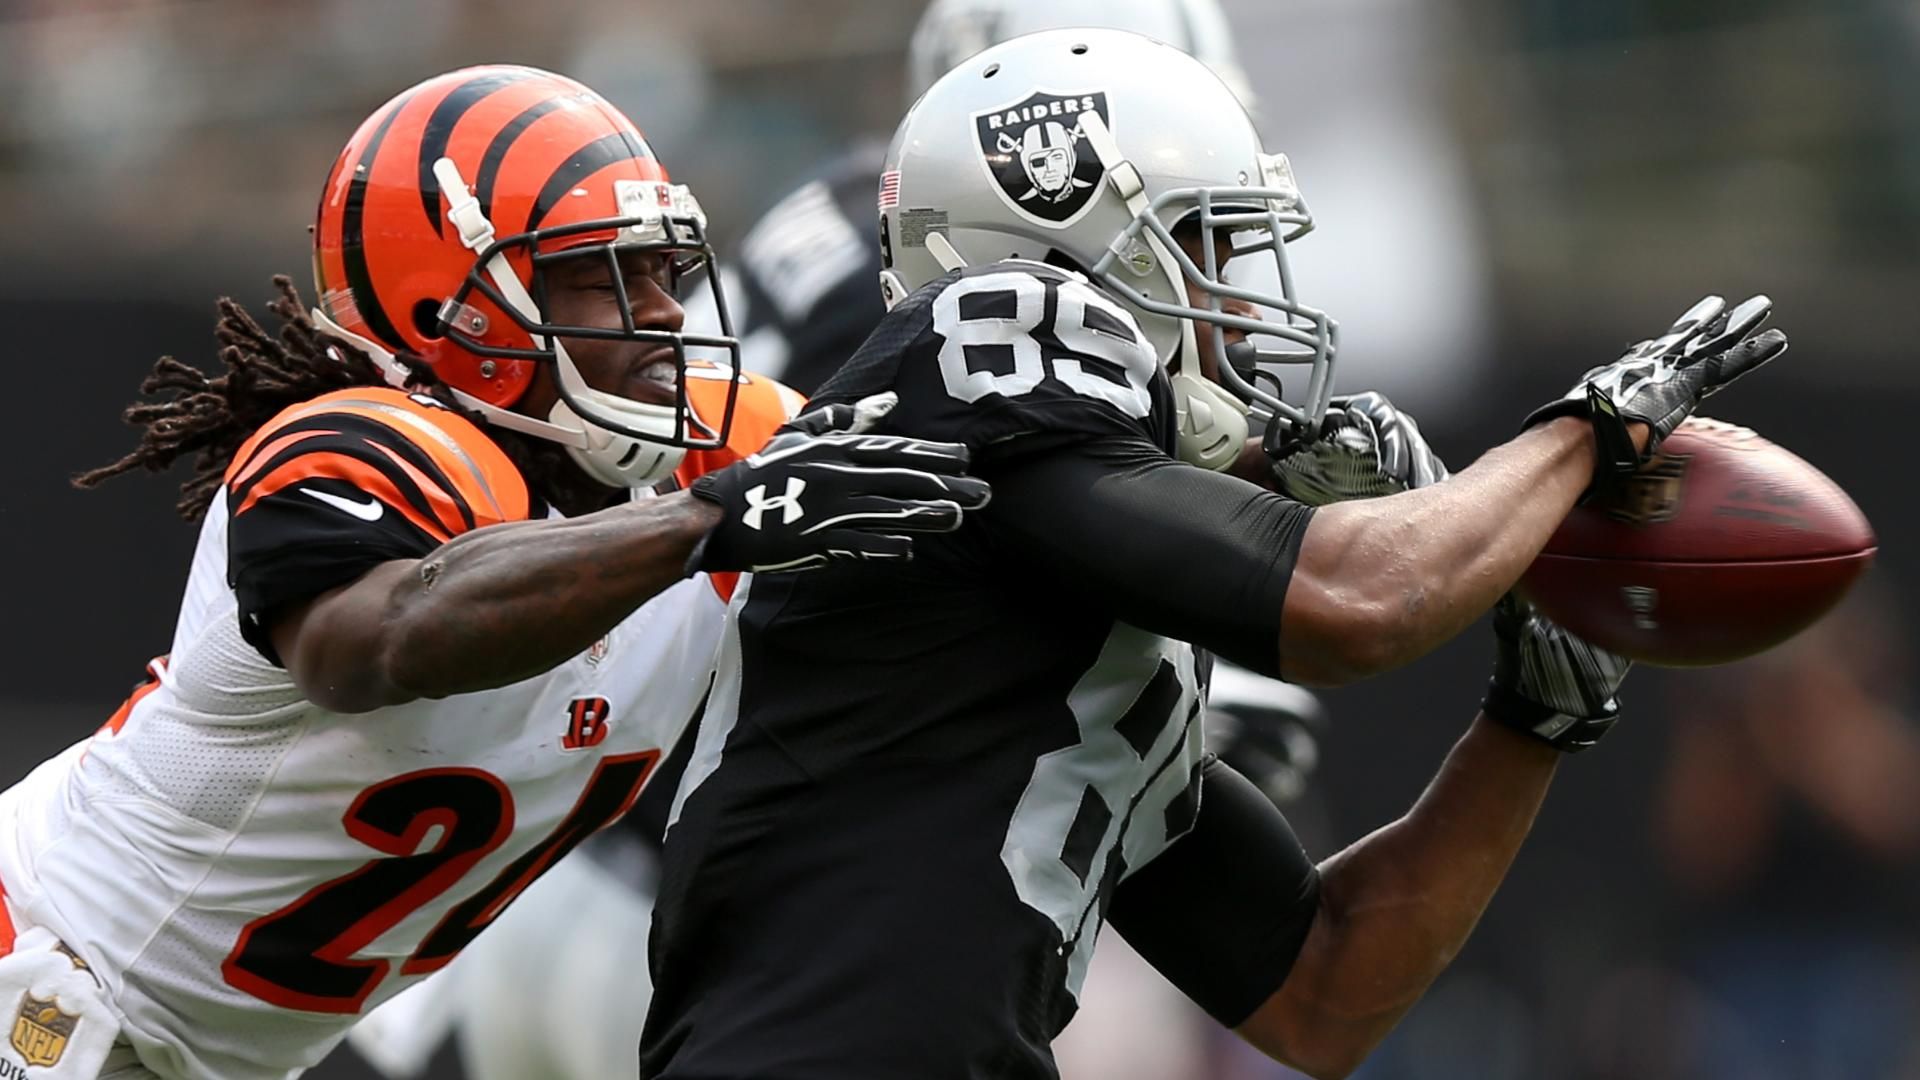 Bengals' Adam Jones on heated play: 'I don't back down from